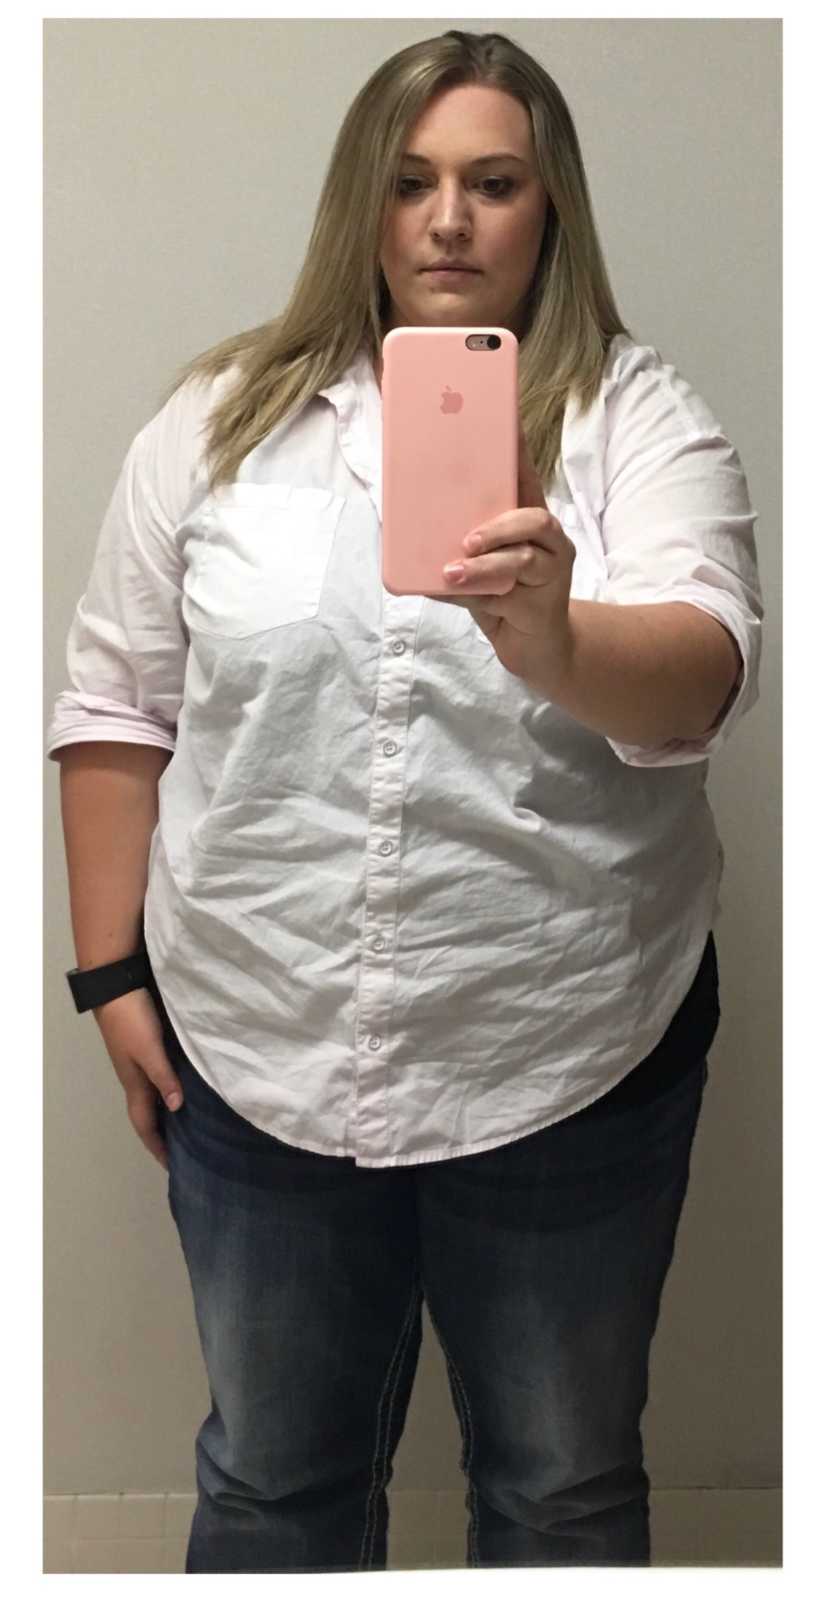 Woman in college takes mirror selfie after gaining weight first semester